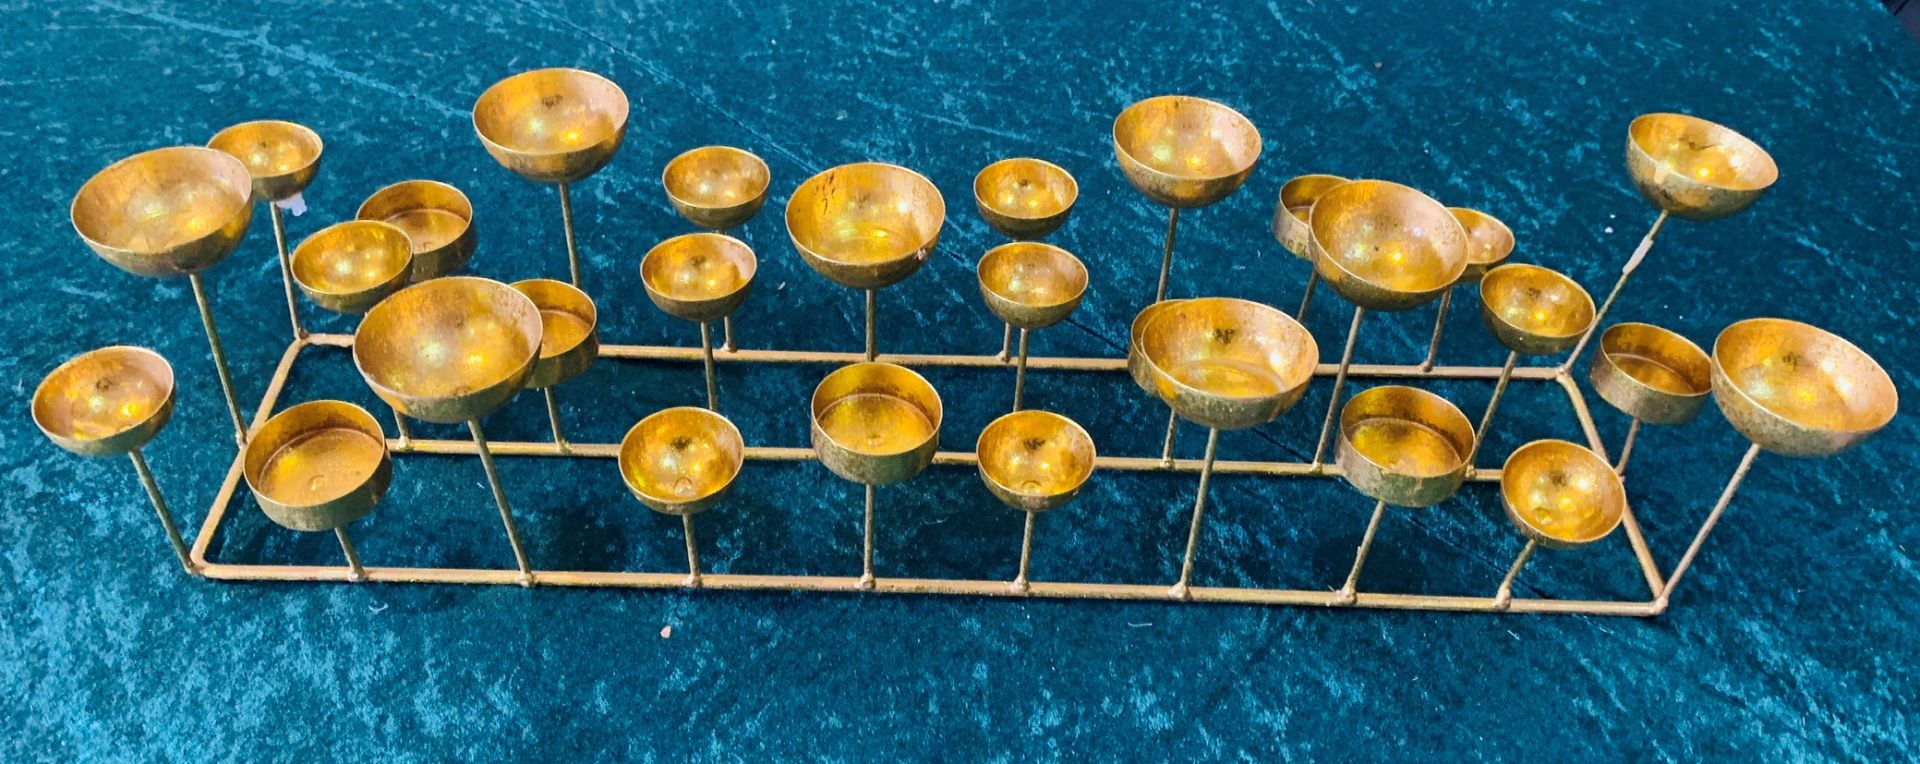 4 x Unusual Brass Multi-Holder for Tealights - Dimensions: 54x12cm - Ref: Lot 16 - CL548 - Location: